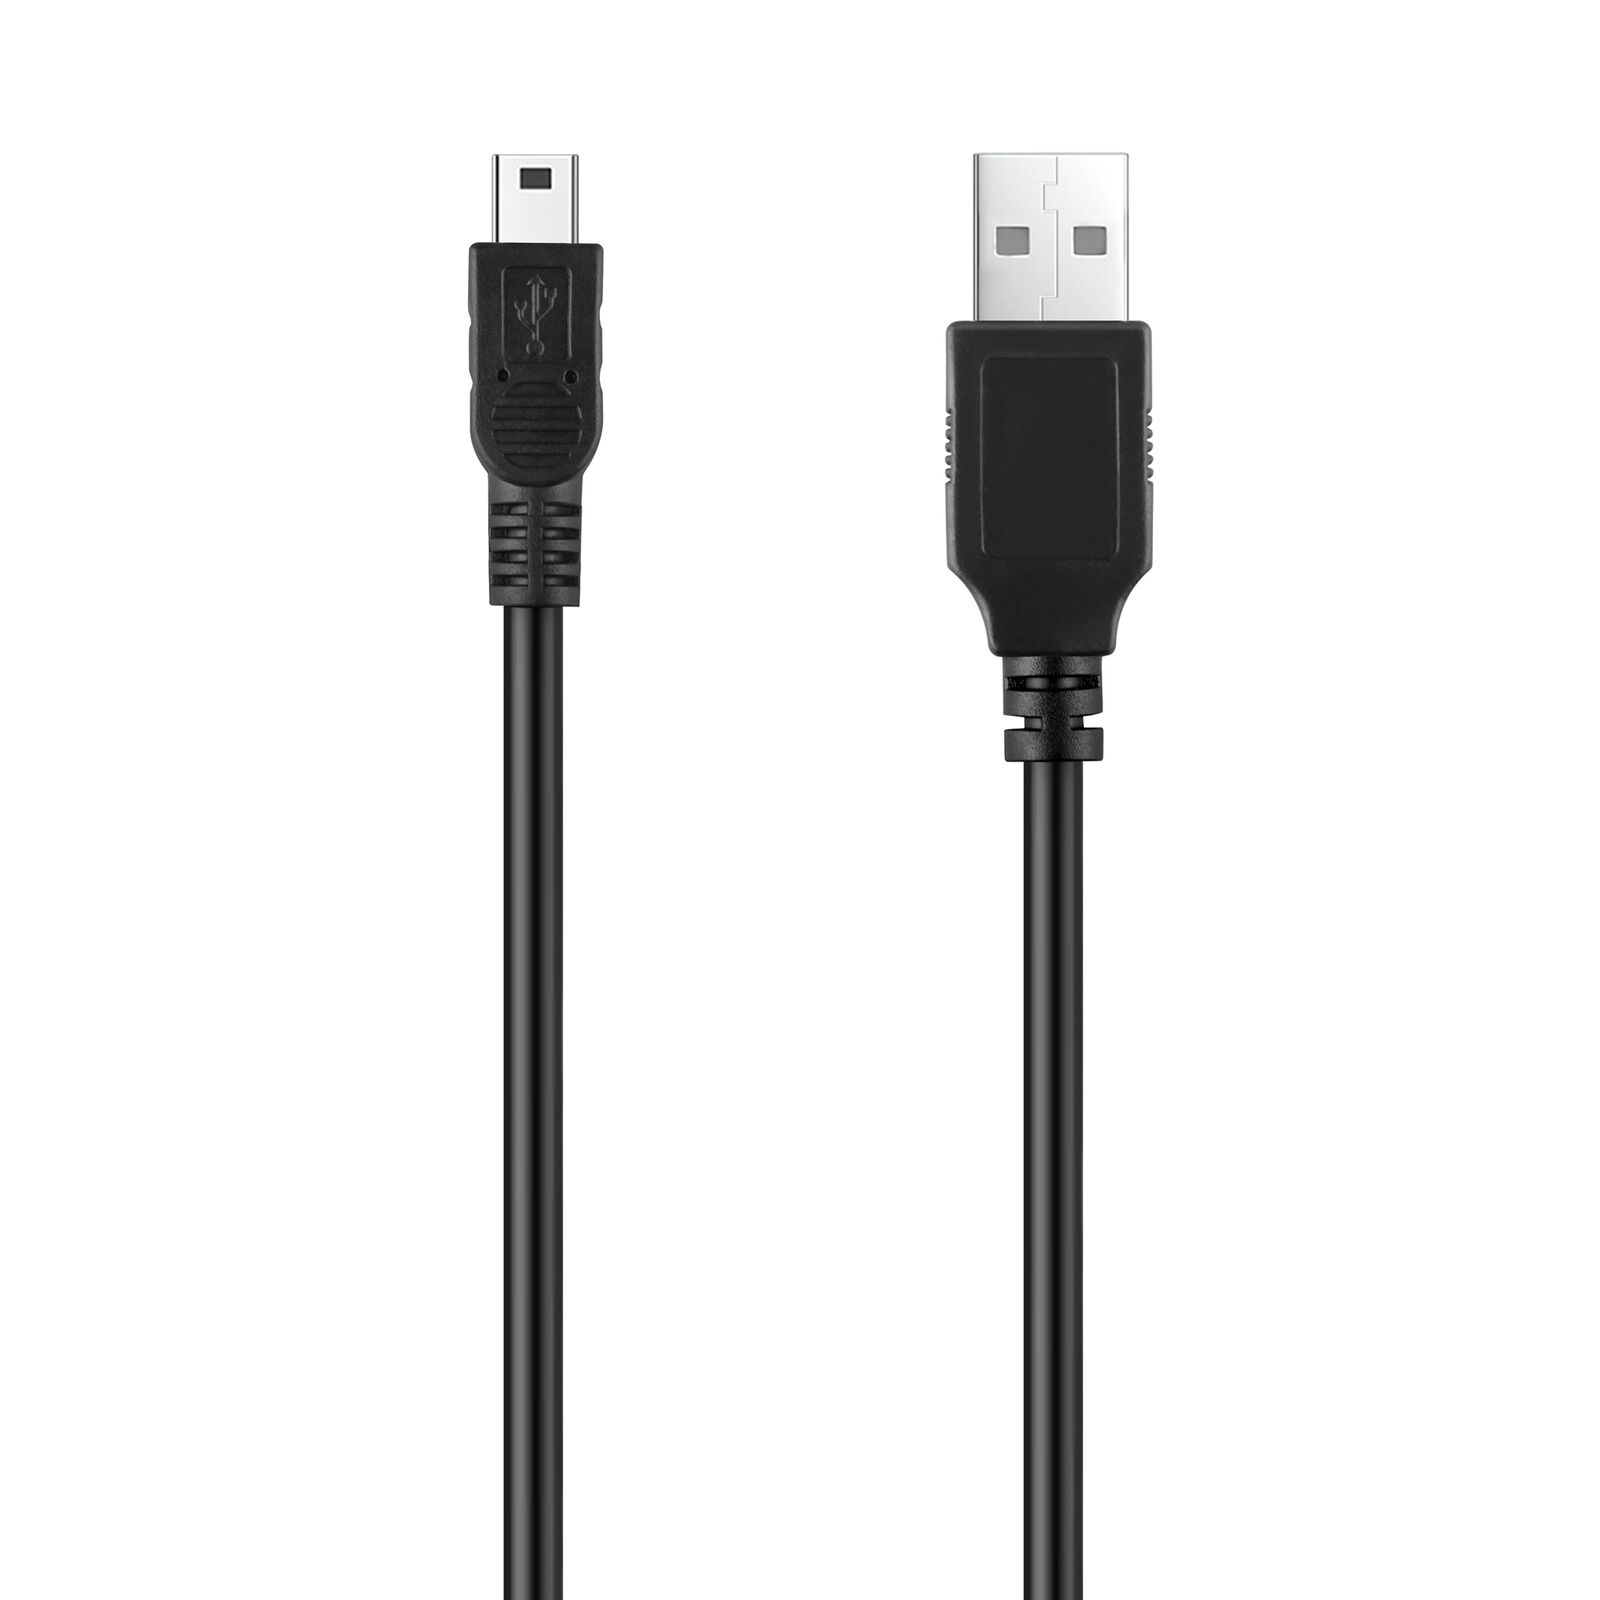 5ft Standard USB 2.0 PC Connect Data Sync Cable Cord Type A Male to Mini B Male